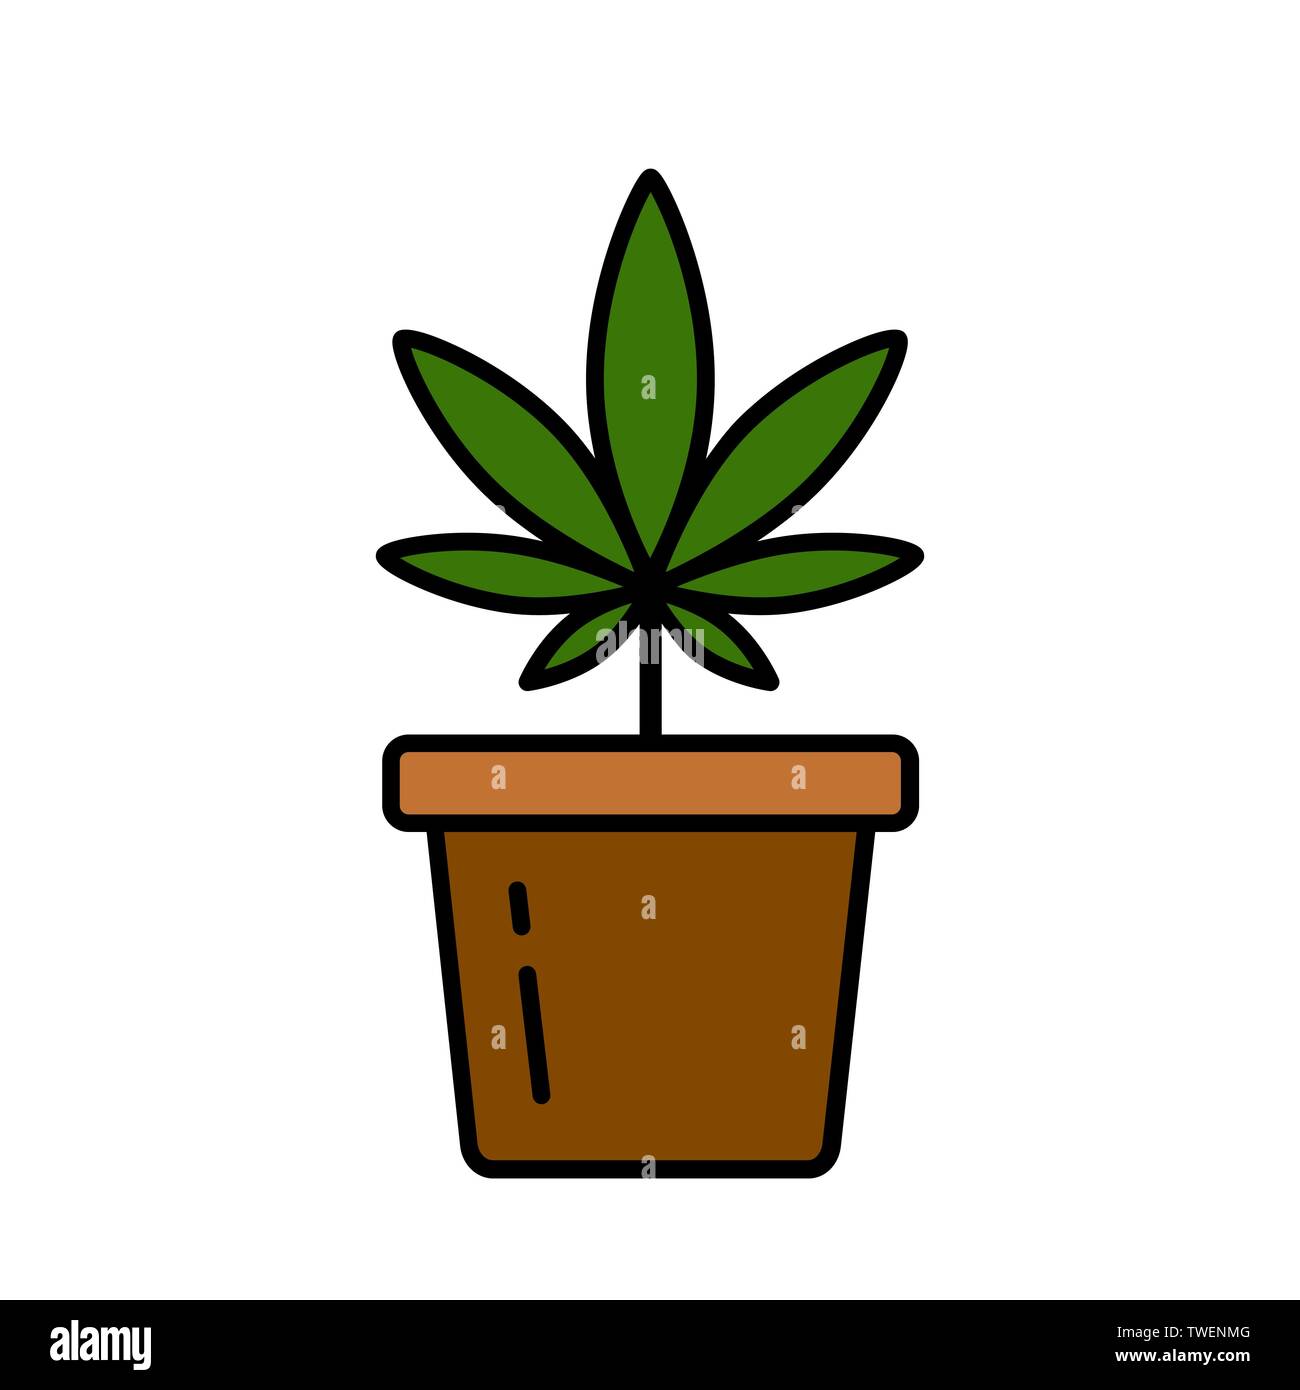 Cannabis plant in a flower pot. Medical marijuana. Growing cannabis. Isolated vector illustration on white background. Stock Vector